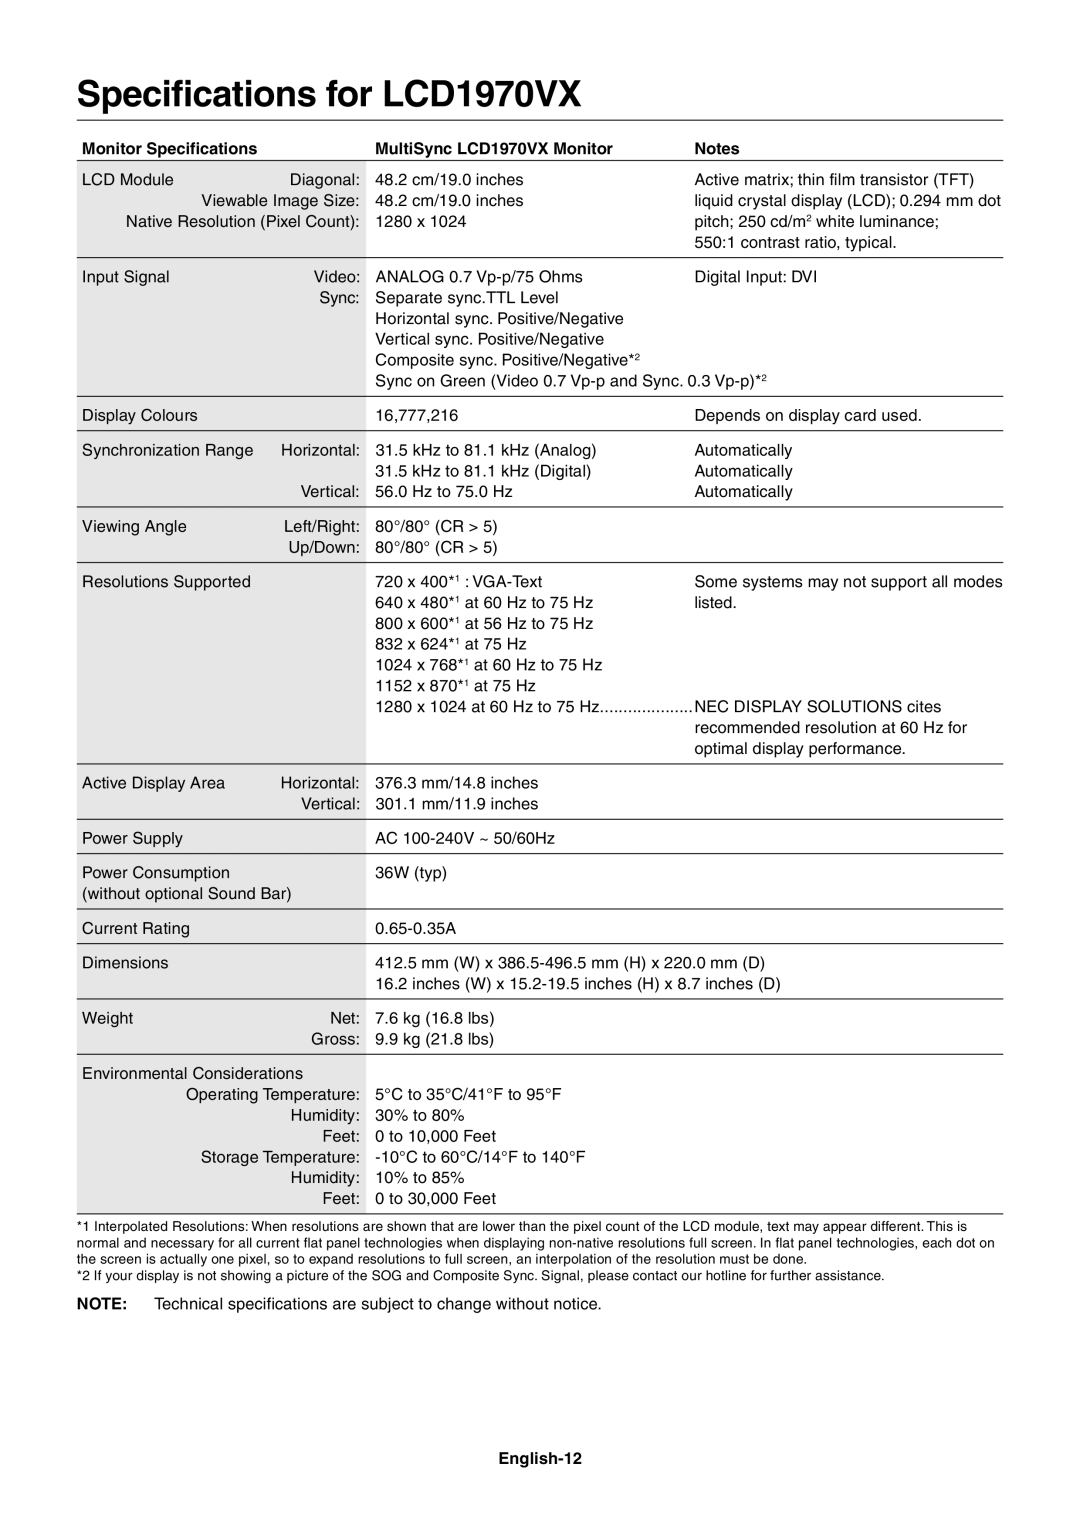 NEC LCD1970NXp user manual Specifications for LCD1970VX, Monitor Specifications, MultiSync LCD1970VX Monitor, English-12 